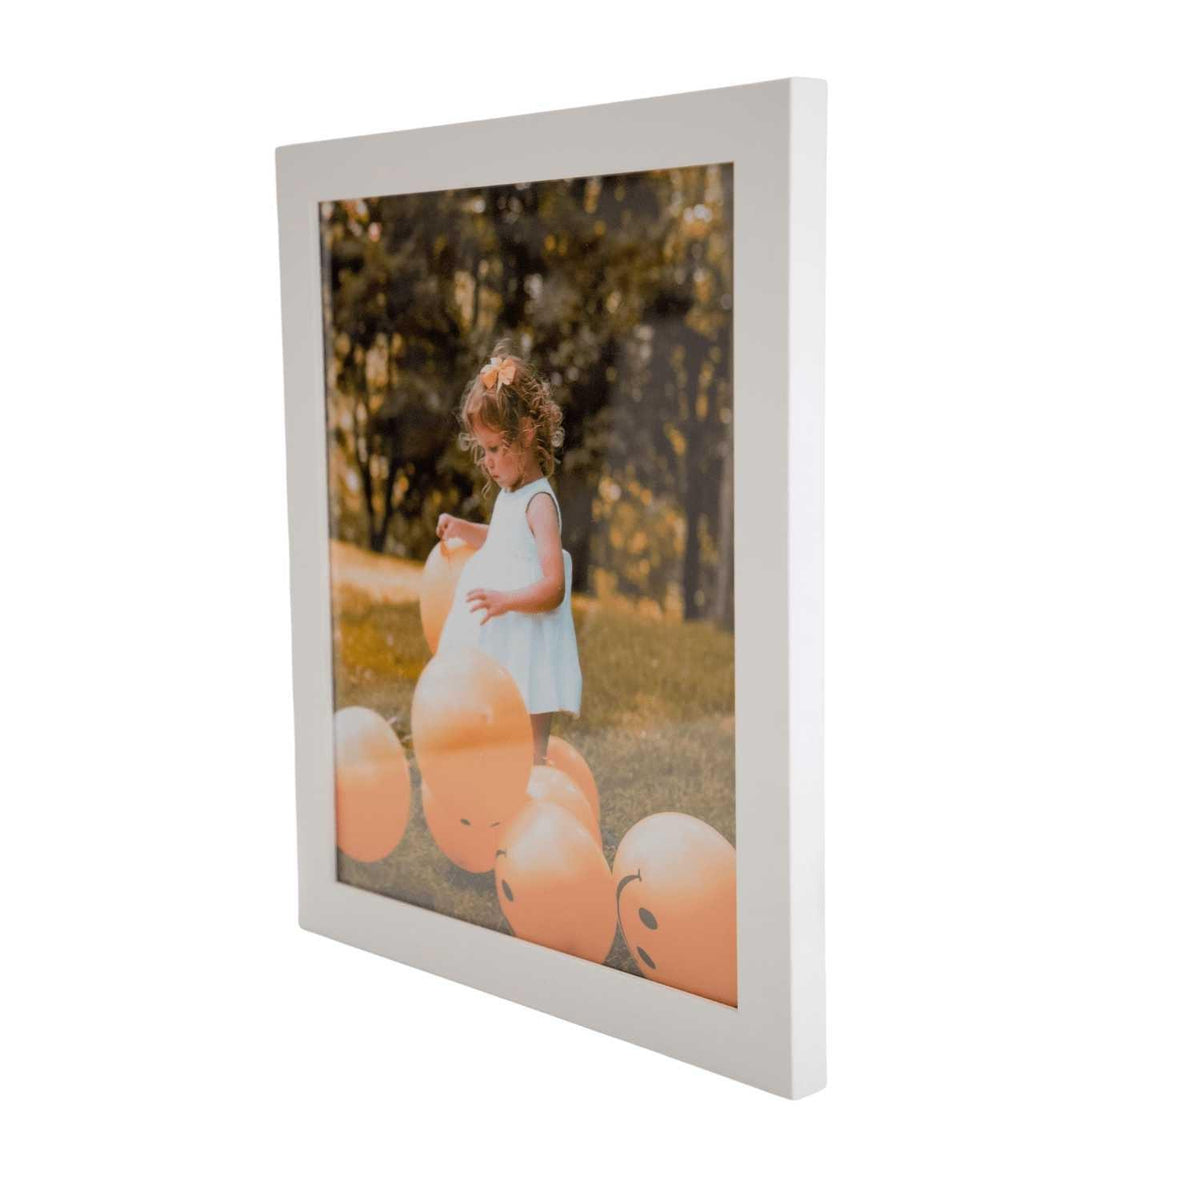 6x10 Picture Frame Brown 6x10 Poster 6 x 10 6by10 Photo